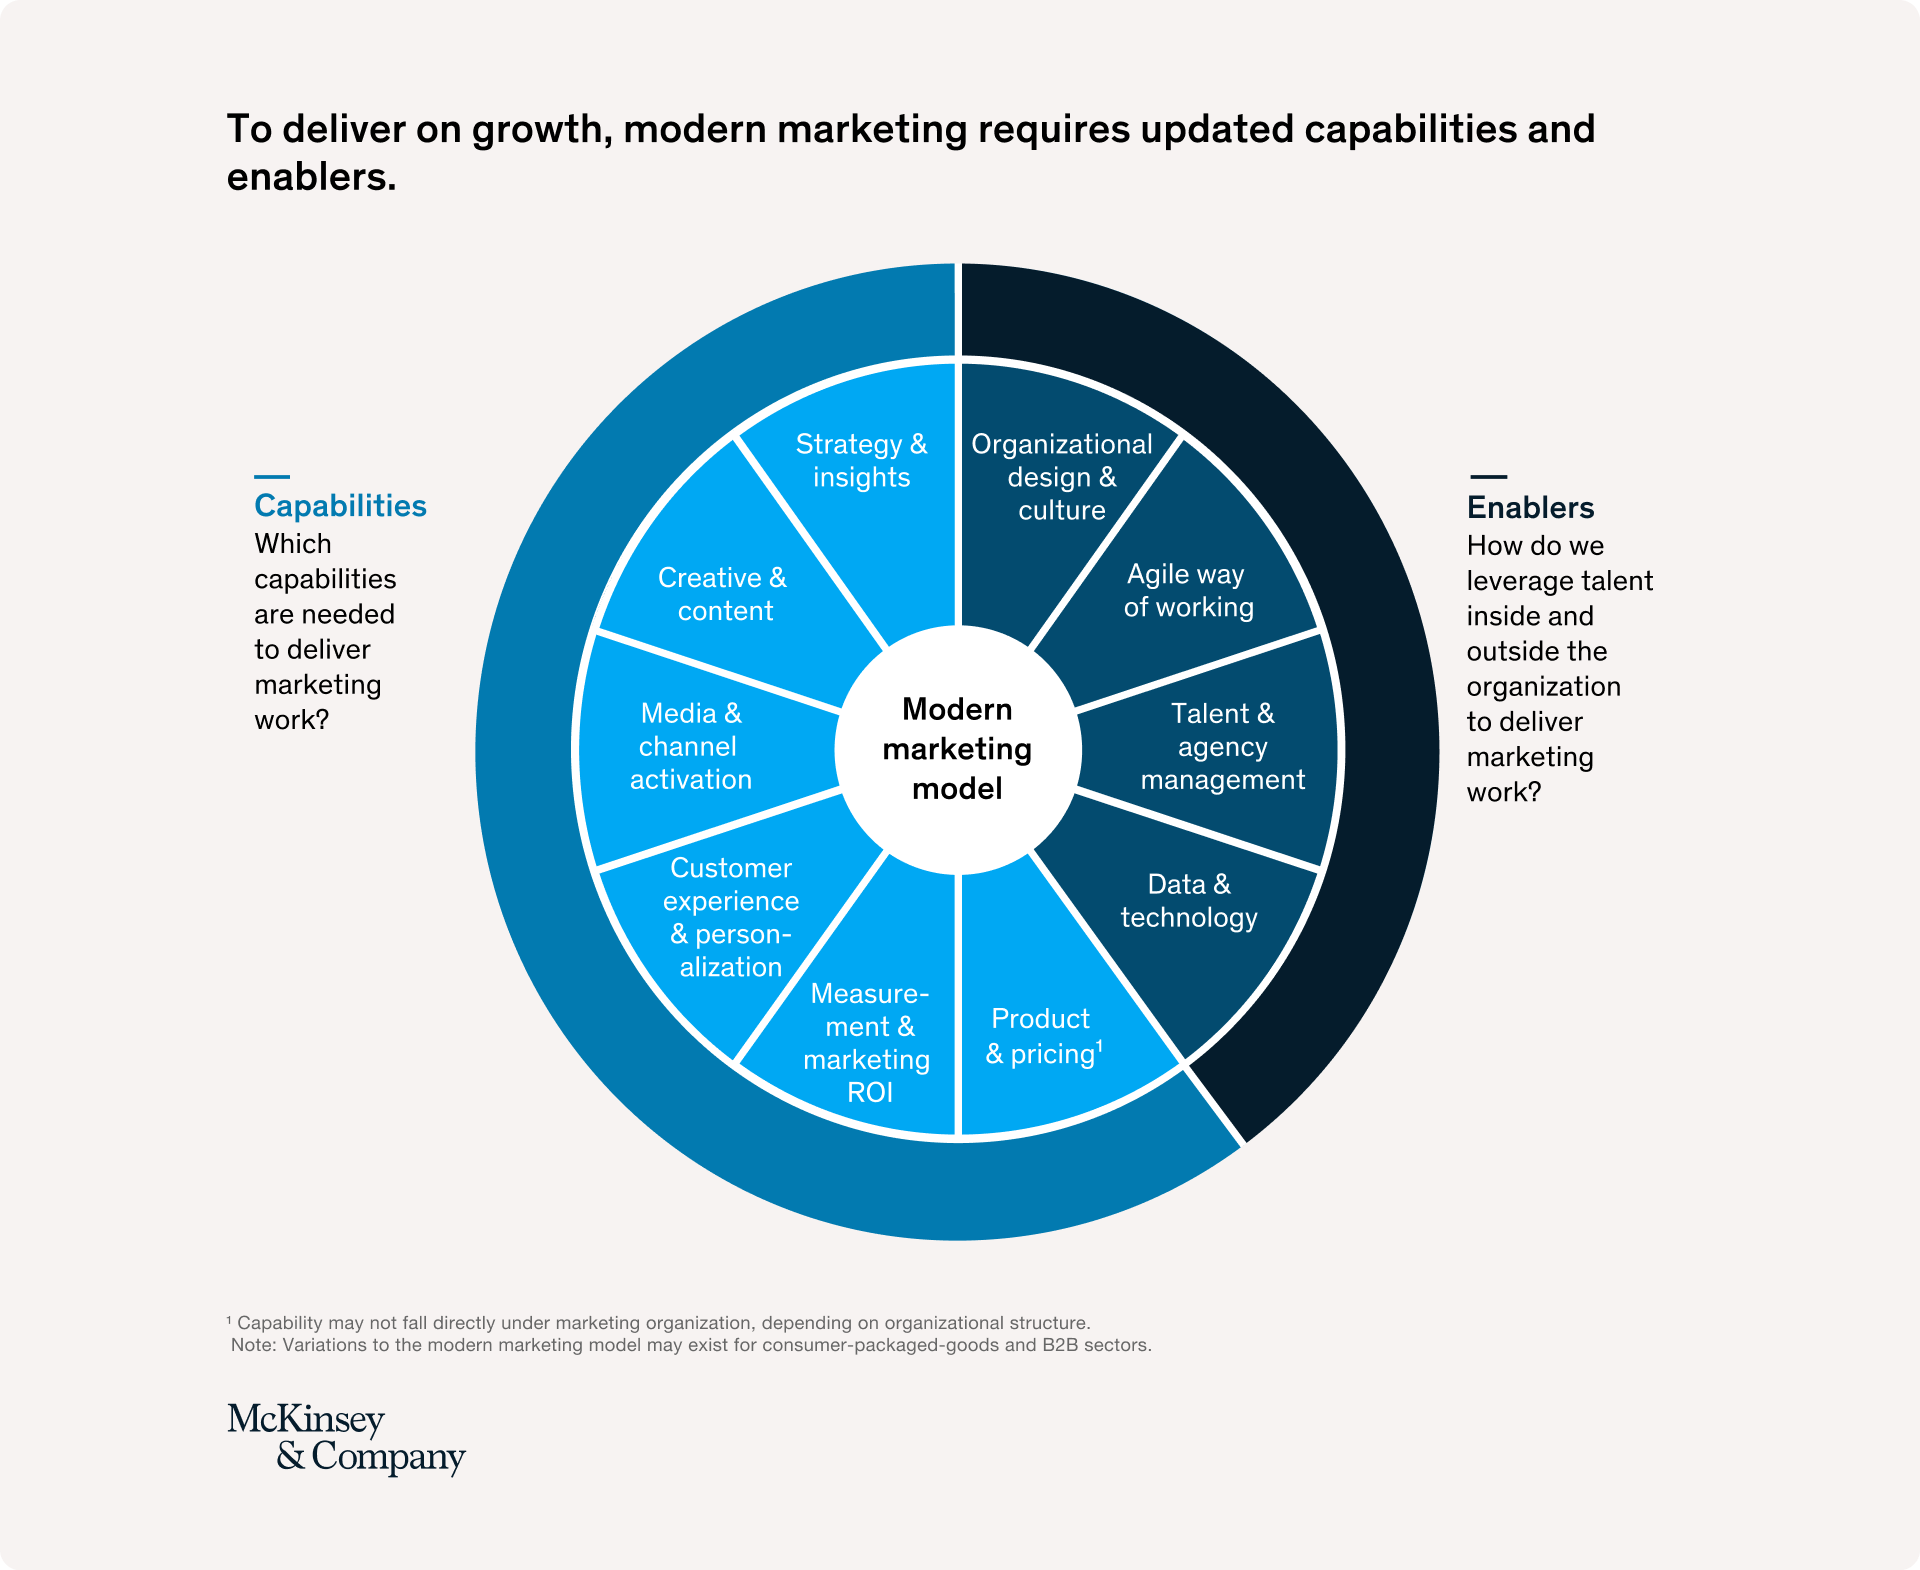 McKinsey & Company graph of Capabilities and Enablers of modern marketing